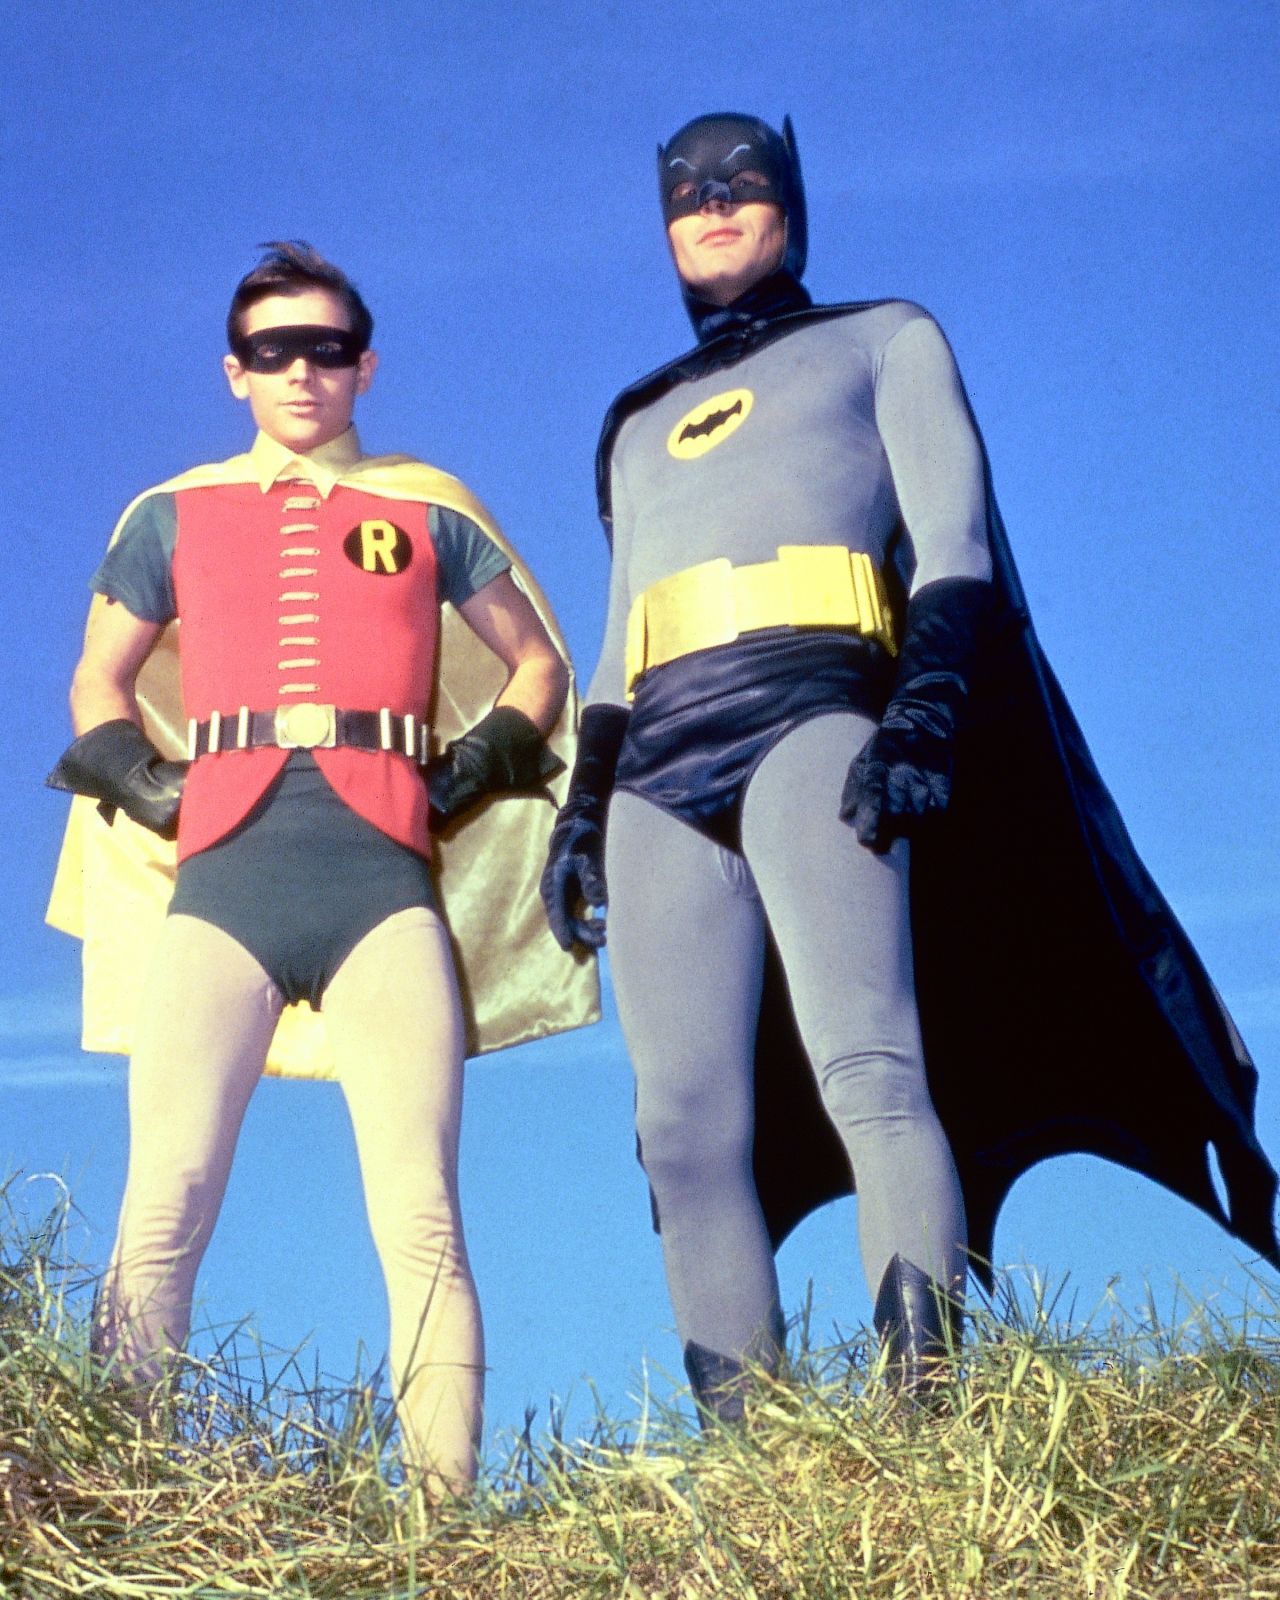 Batmania took the country by storm in early 1966 with ABC's TV series, starring Adam West and Burt Ward. The tongue-in-cheek series was an overnight success that lost steam by its third and final season.